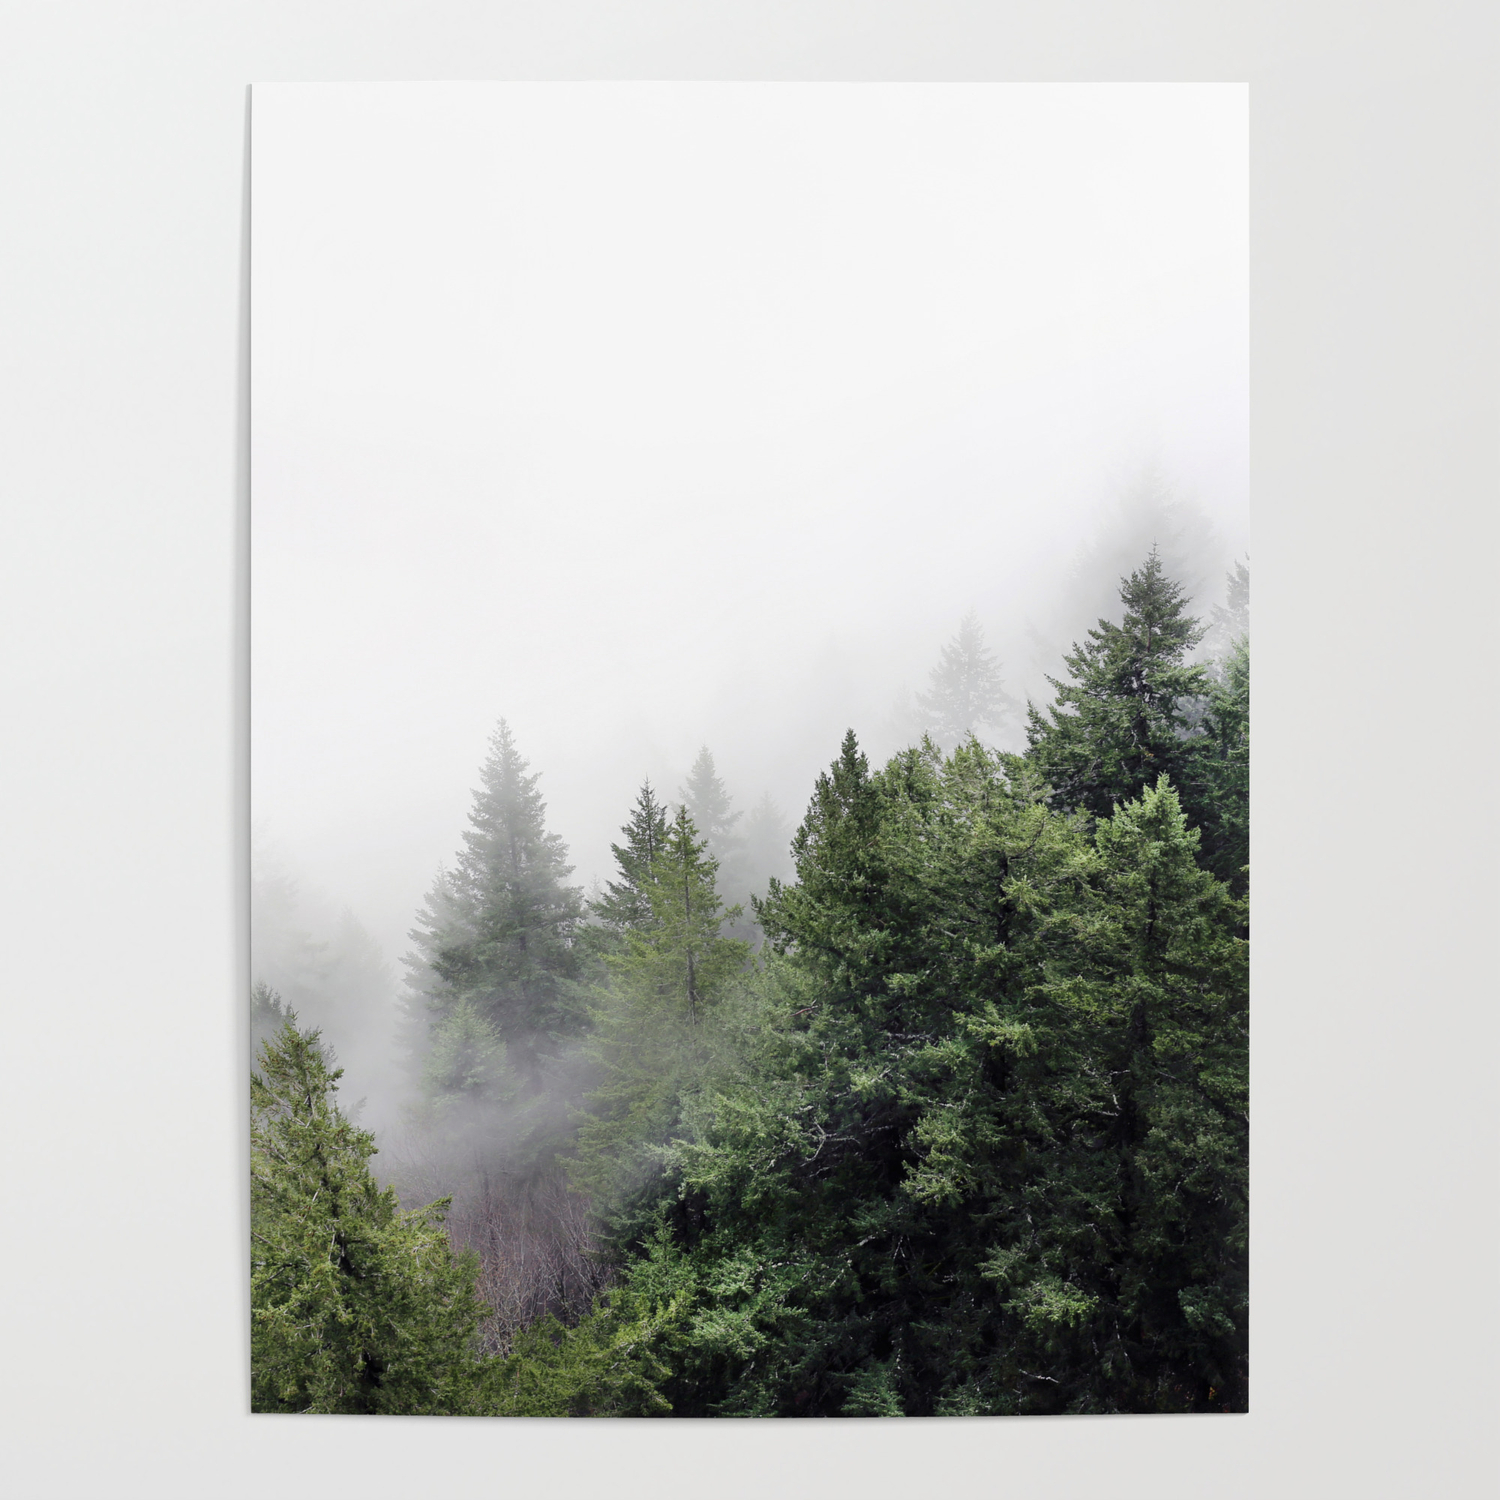 THETFORD FOREST TREES MIST PHOTO ART PRINT POSTER PICTURE BMP2401A